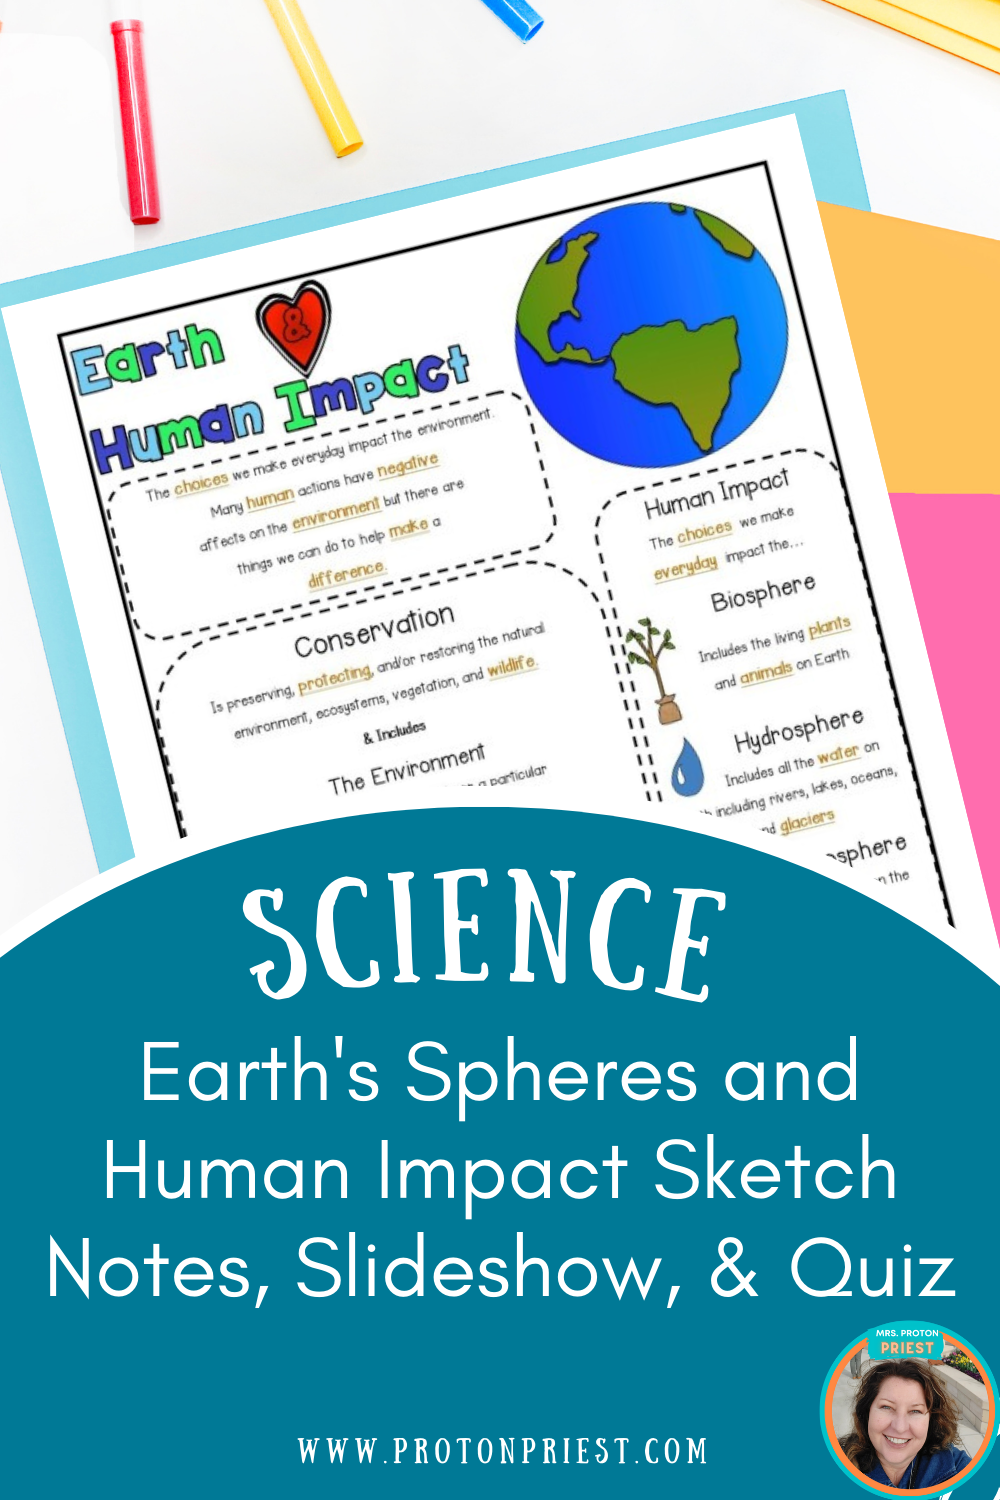 5th grade science sketch notes on human impact and Earth's spheres